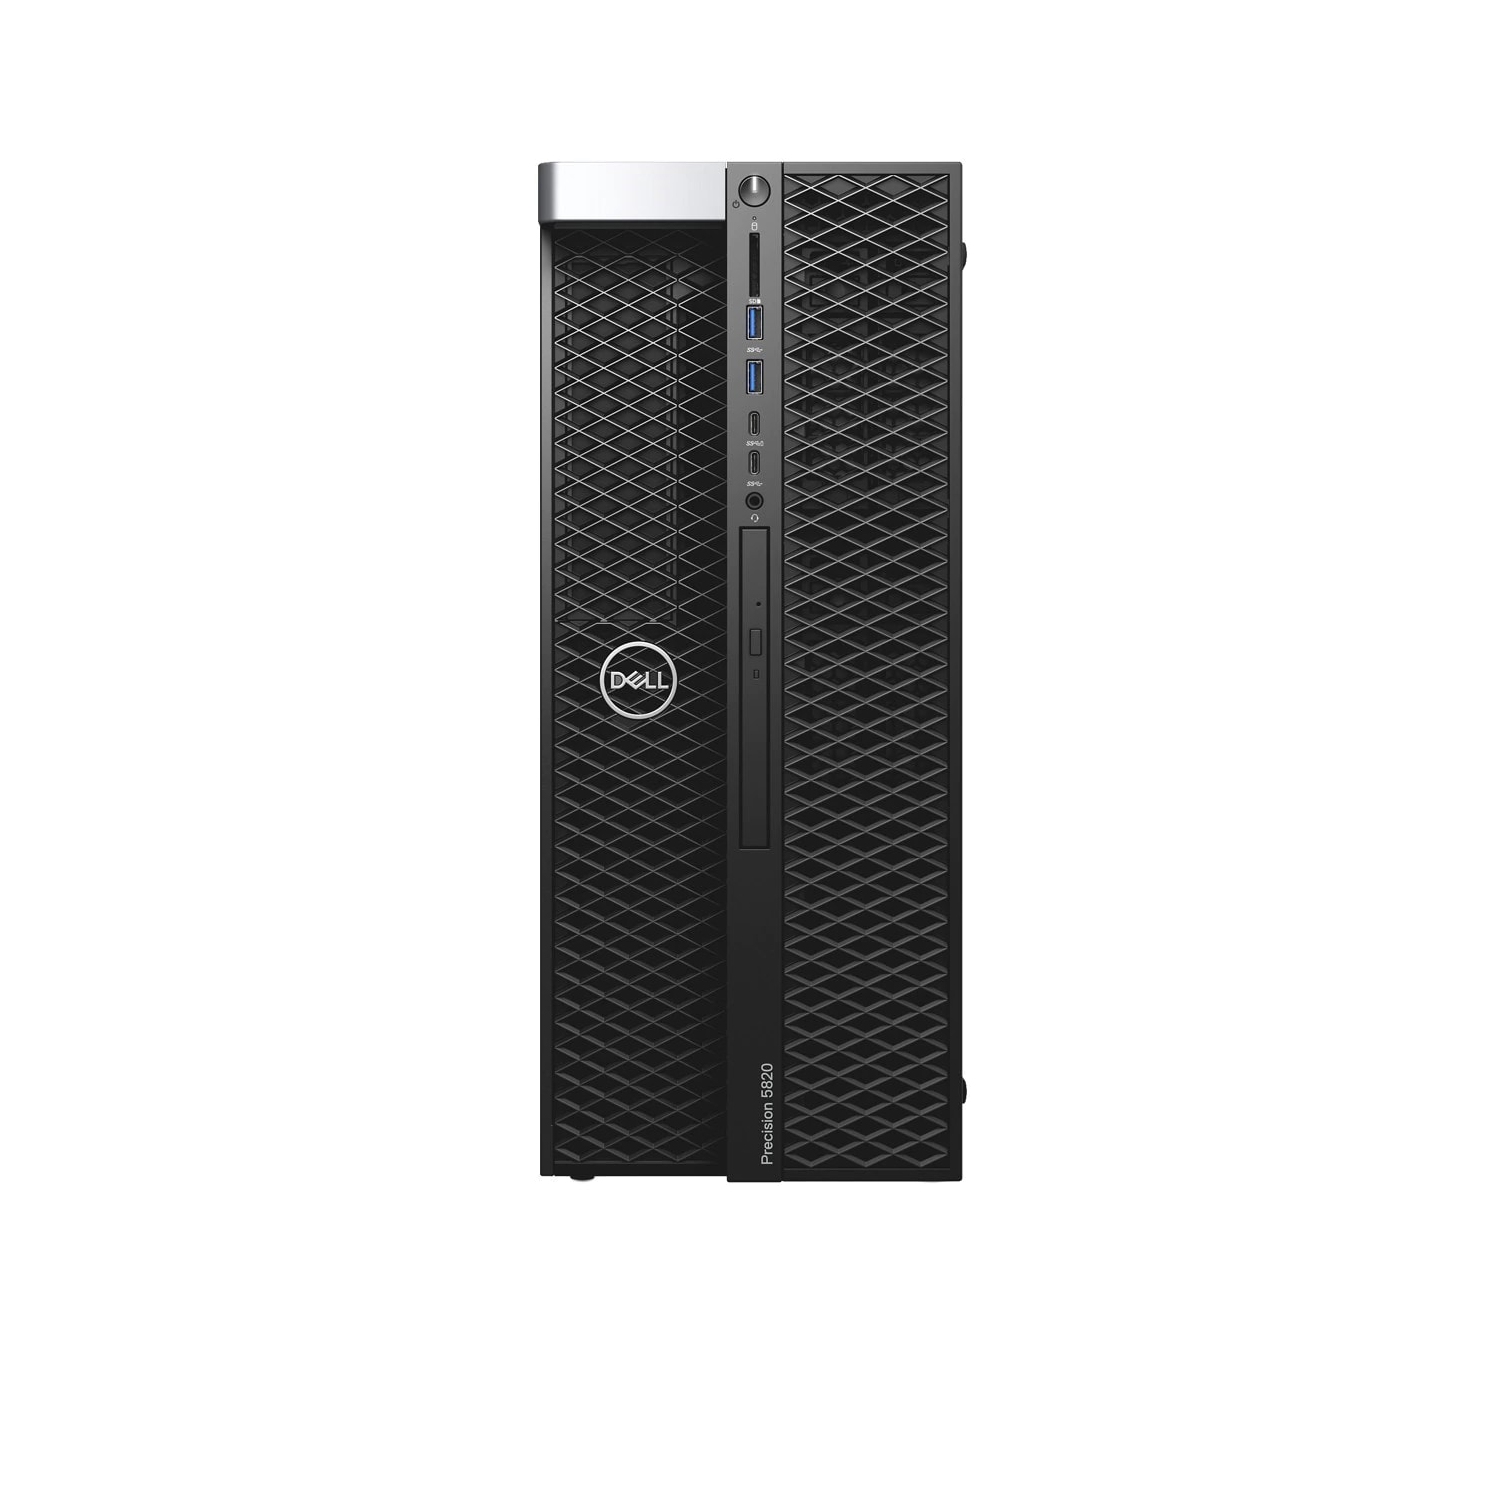 Refurbished (Excellent) - Dell Precision T5820 Workstation Desktop (2018) | Core Xeon W - 1TB SSD - 64GB RAM - RTX 4000 | 4 Cores Certified Refurbished